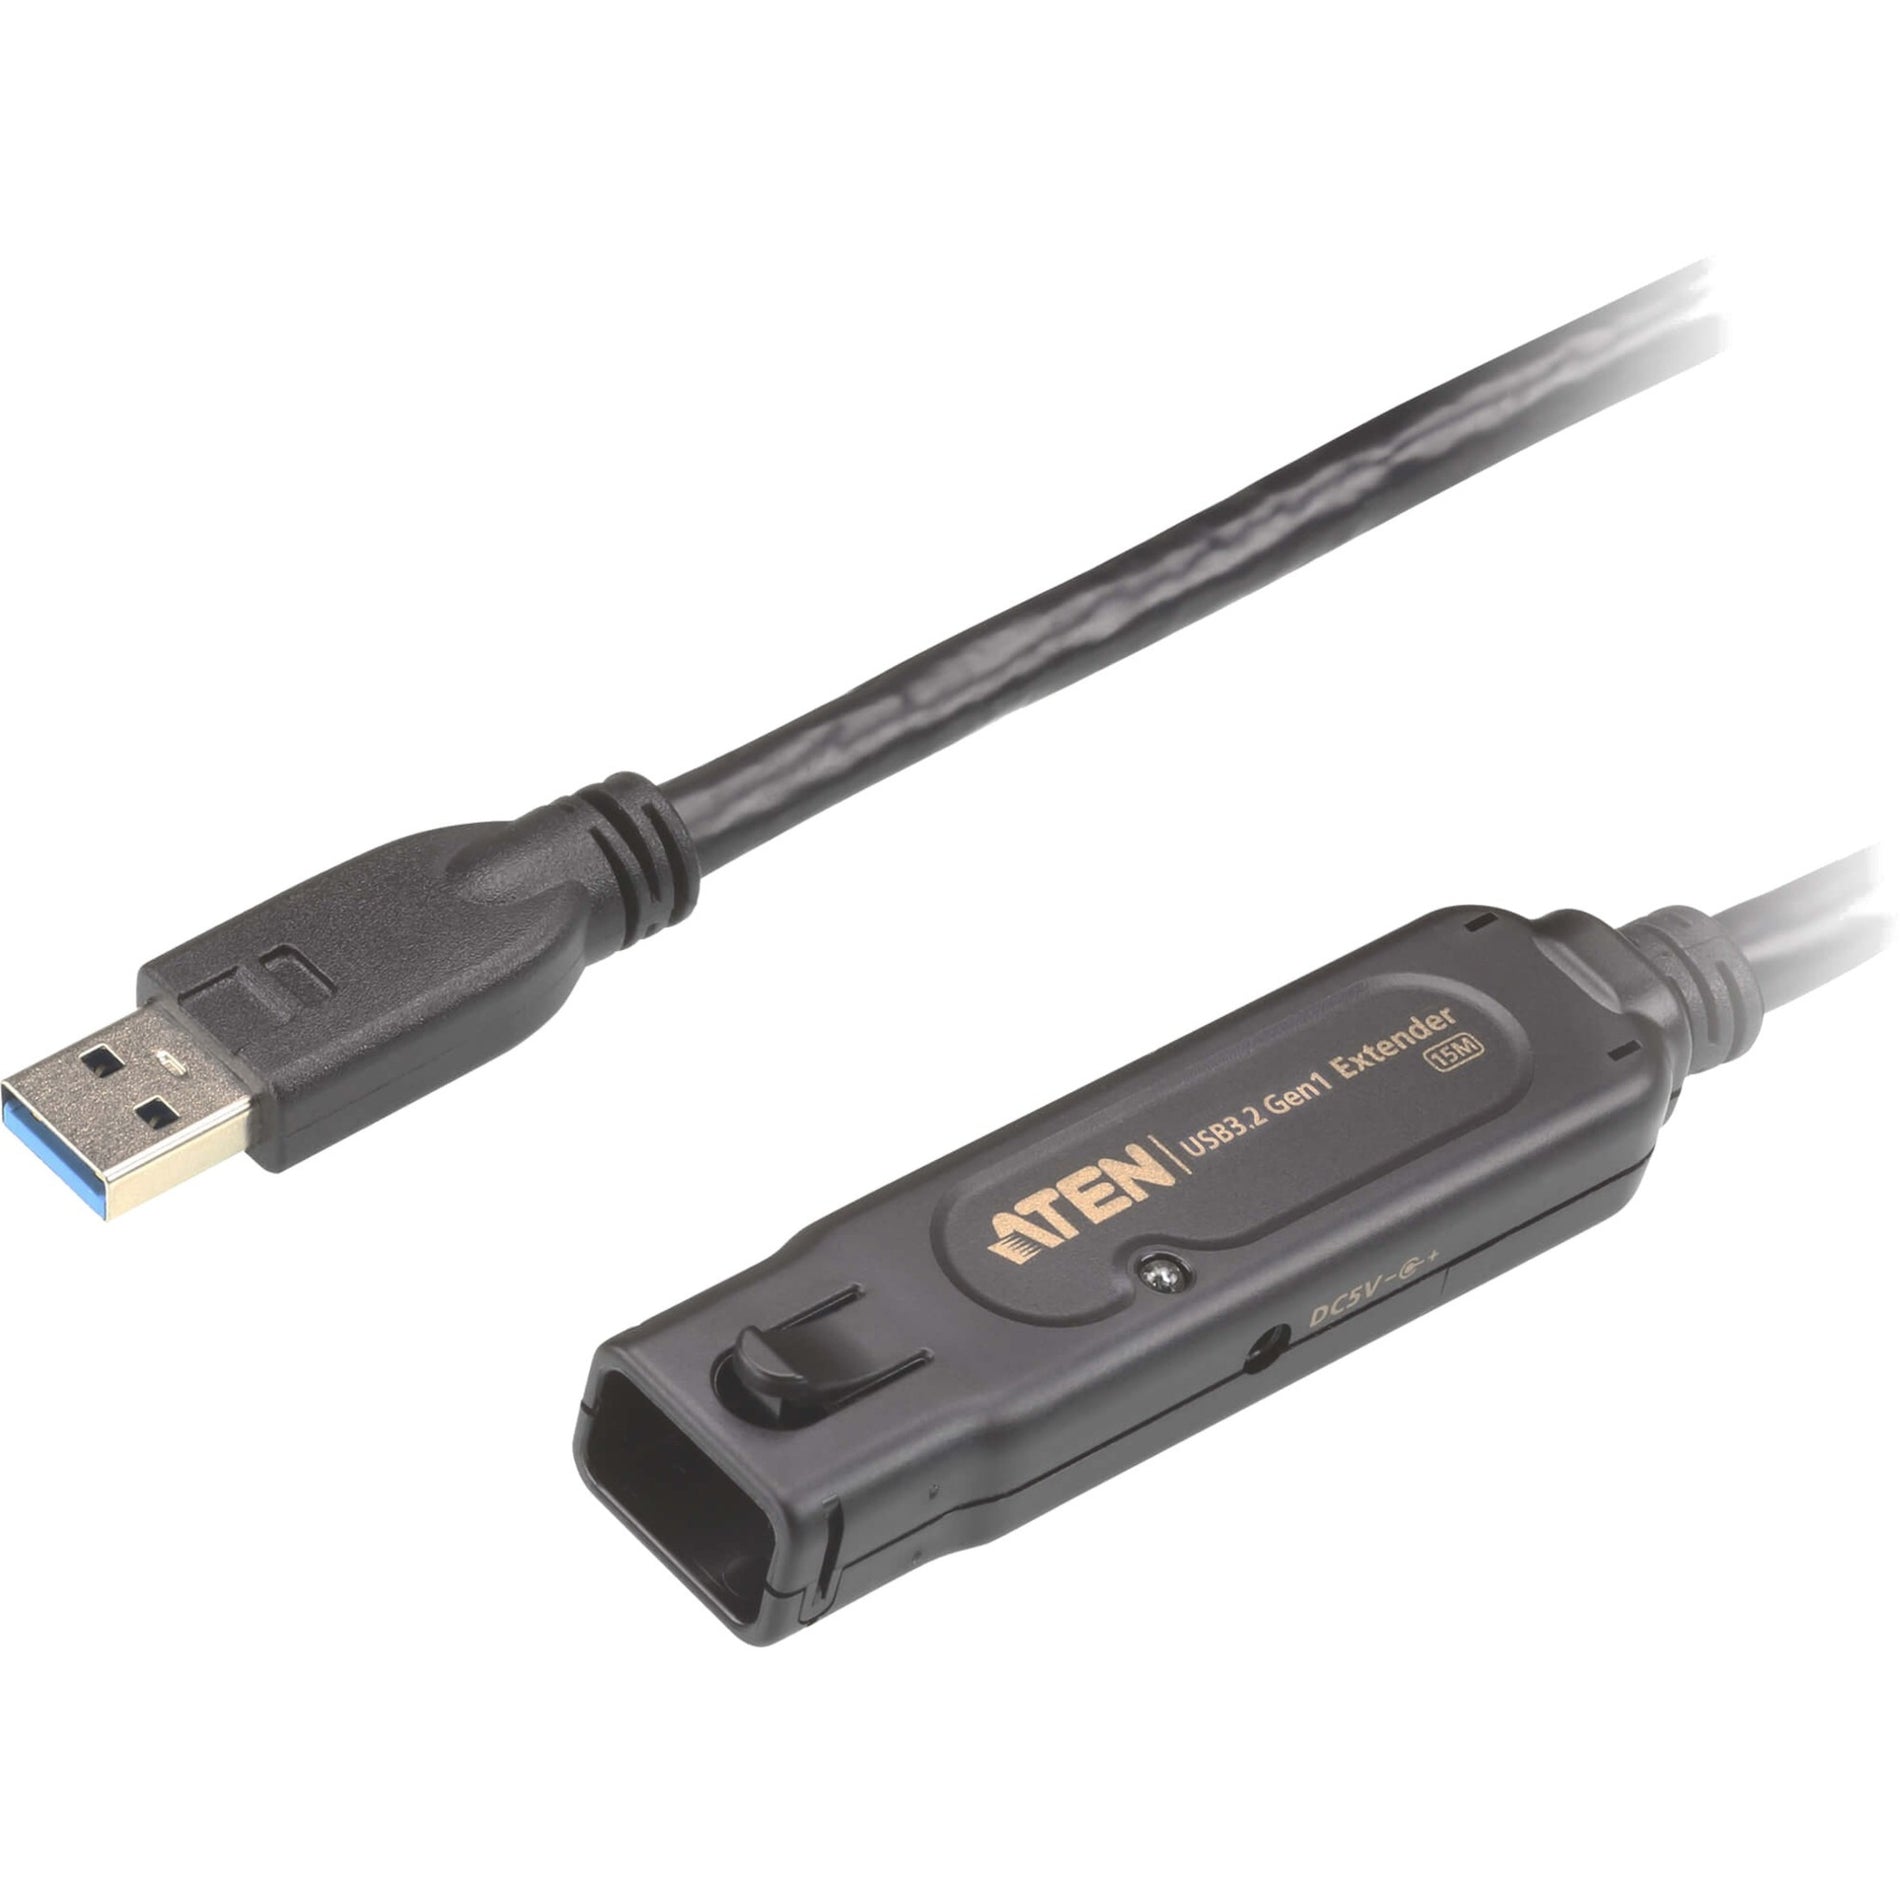 ATEN UE3315A 15 m USB3.2 Gen1 Extender Cable, Plug & Play, 5 Gbit/s Data Transfer Rate, Locking Protection